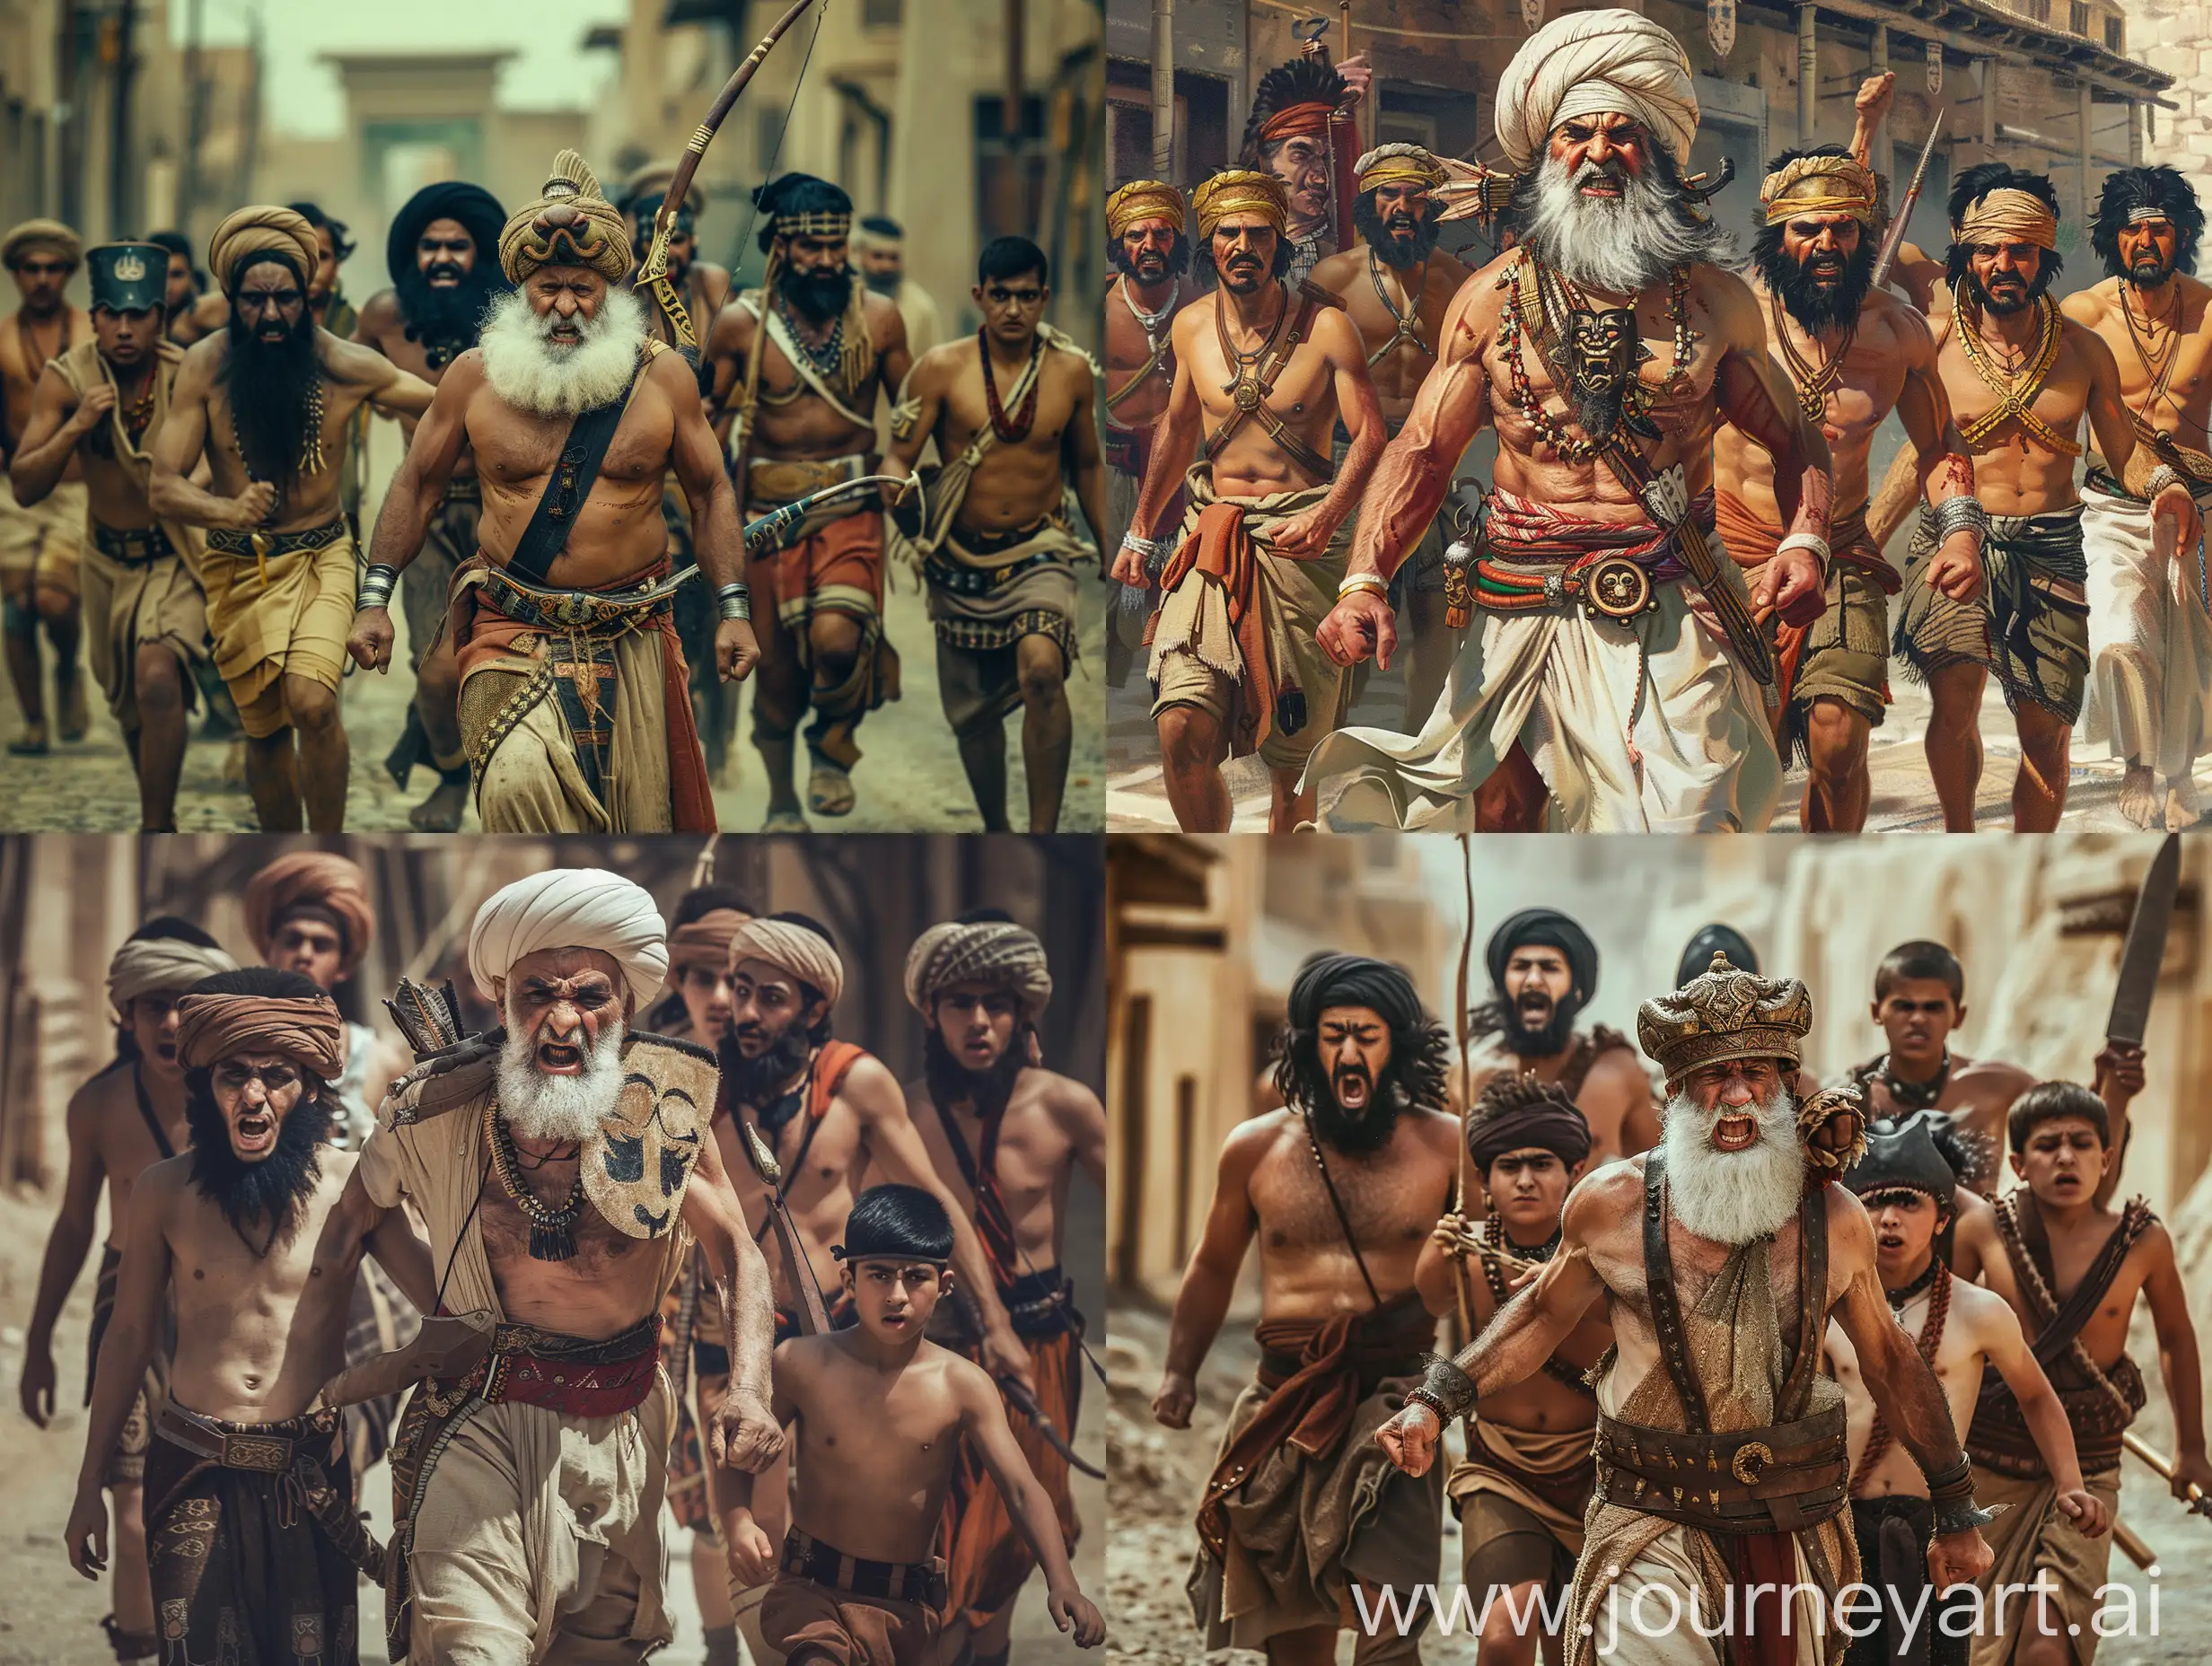 Furious-Persian-Patriarch-Leads-Sons-in-Ancient-Arge-Bam-Stroll